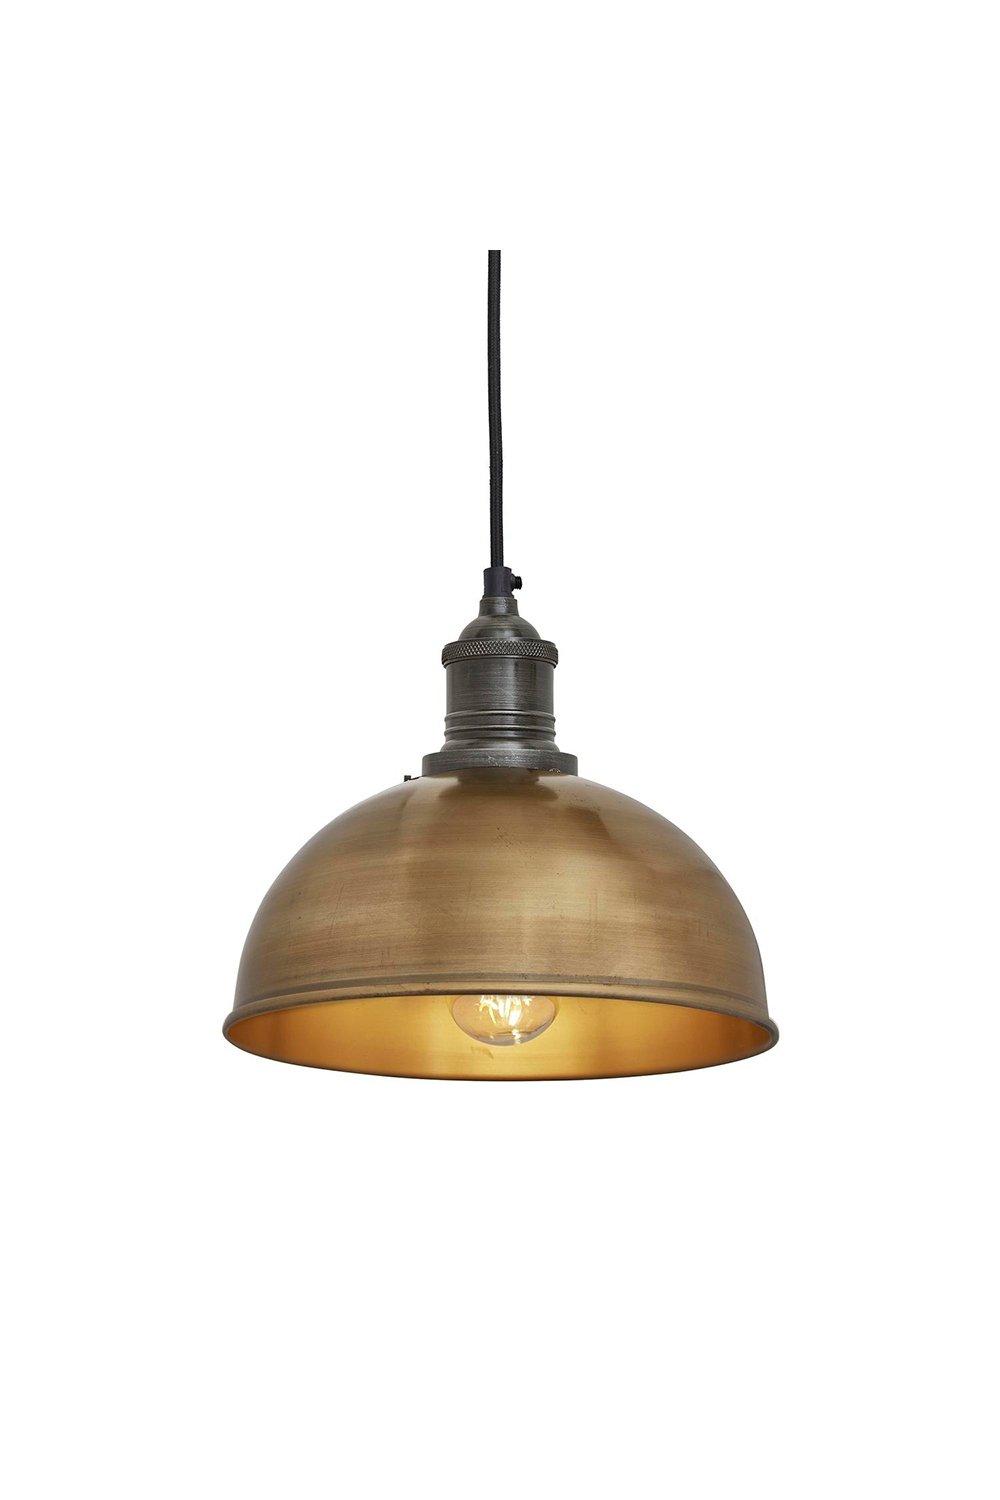 Brooklyn Dome Pendant, 8 Inch, Brass, Pewter Holder